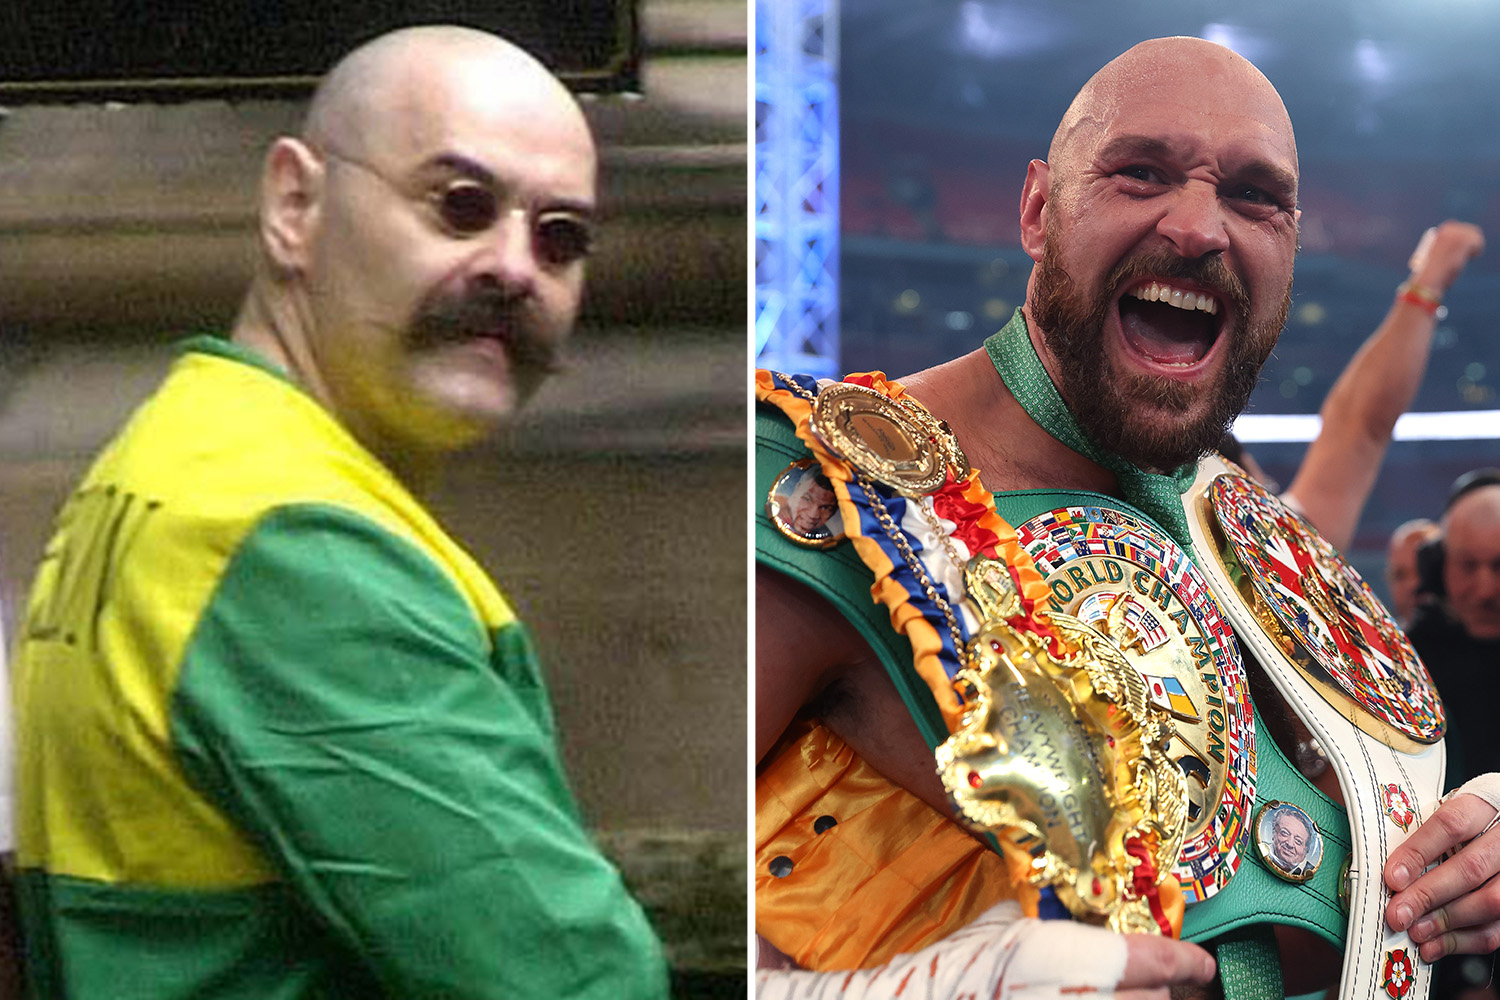 Charles Bronson: Britain’s most famous prisoner “planning a boxing match against Tyson Fury when it’s his time out of prison”.